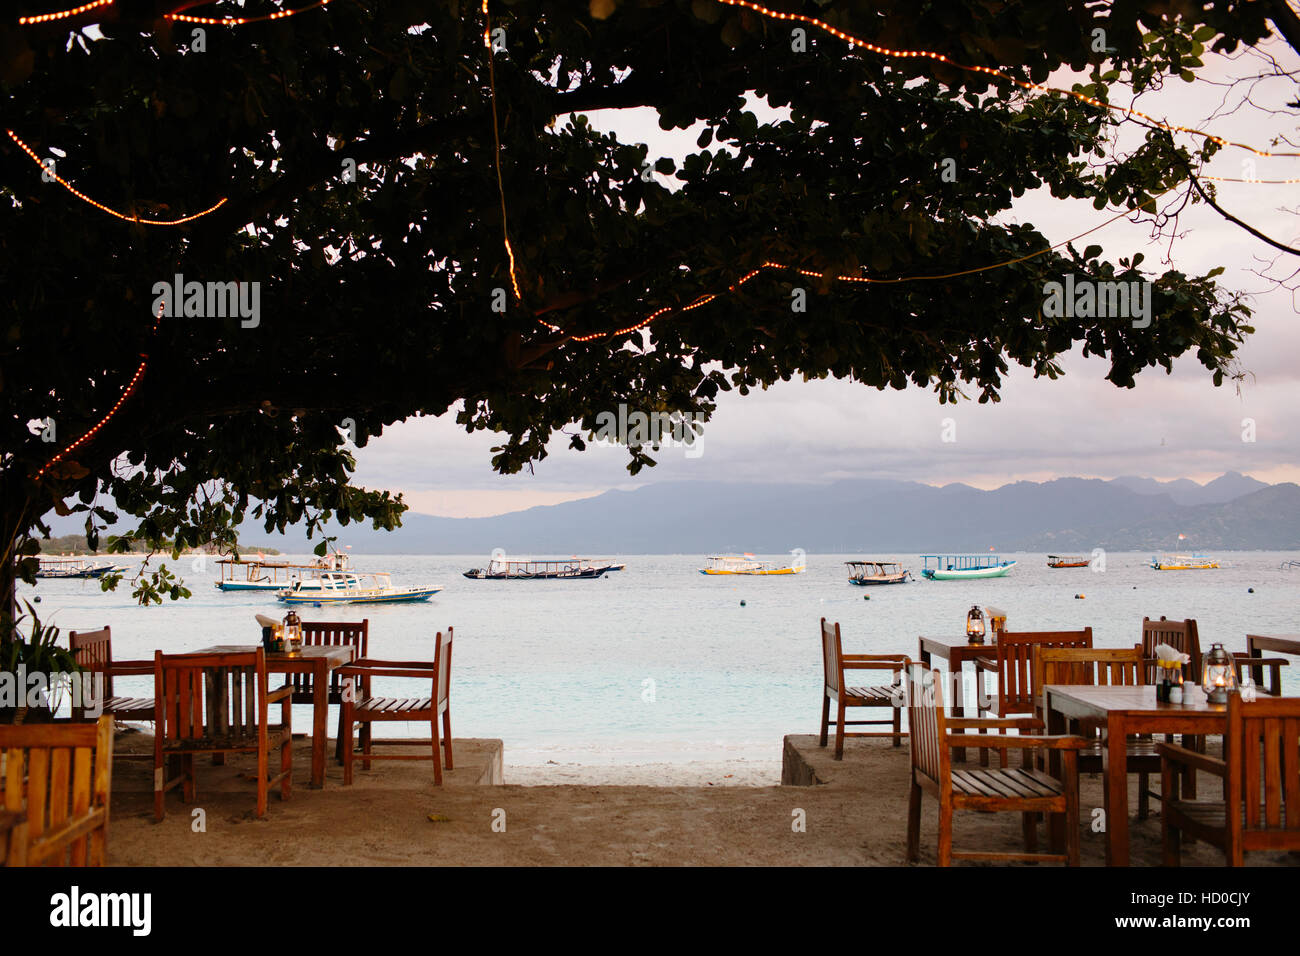 A view of the sea, boats and Lombok from a beachside restaurant on Gili Trawangan Stock Photo